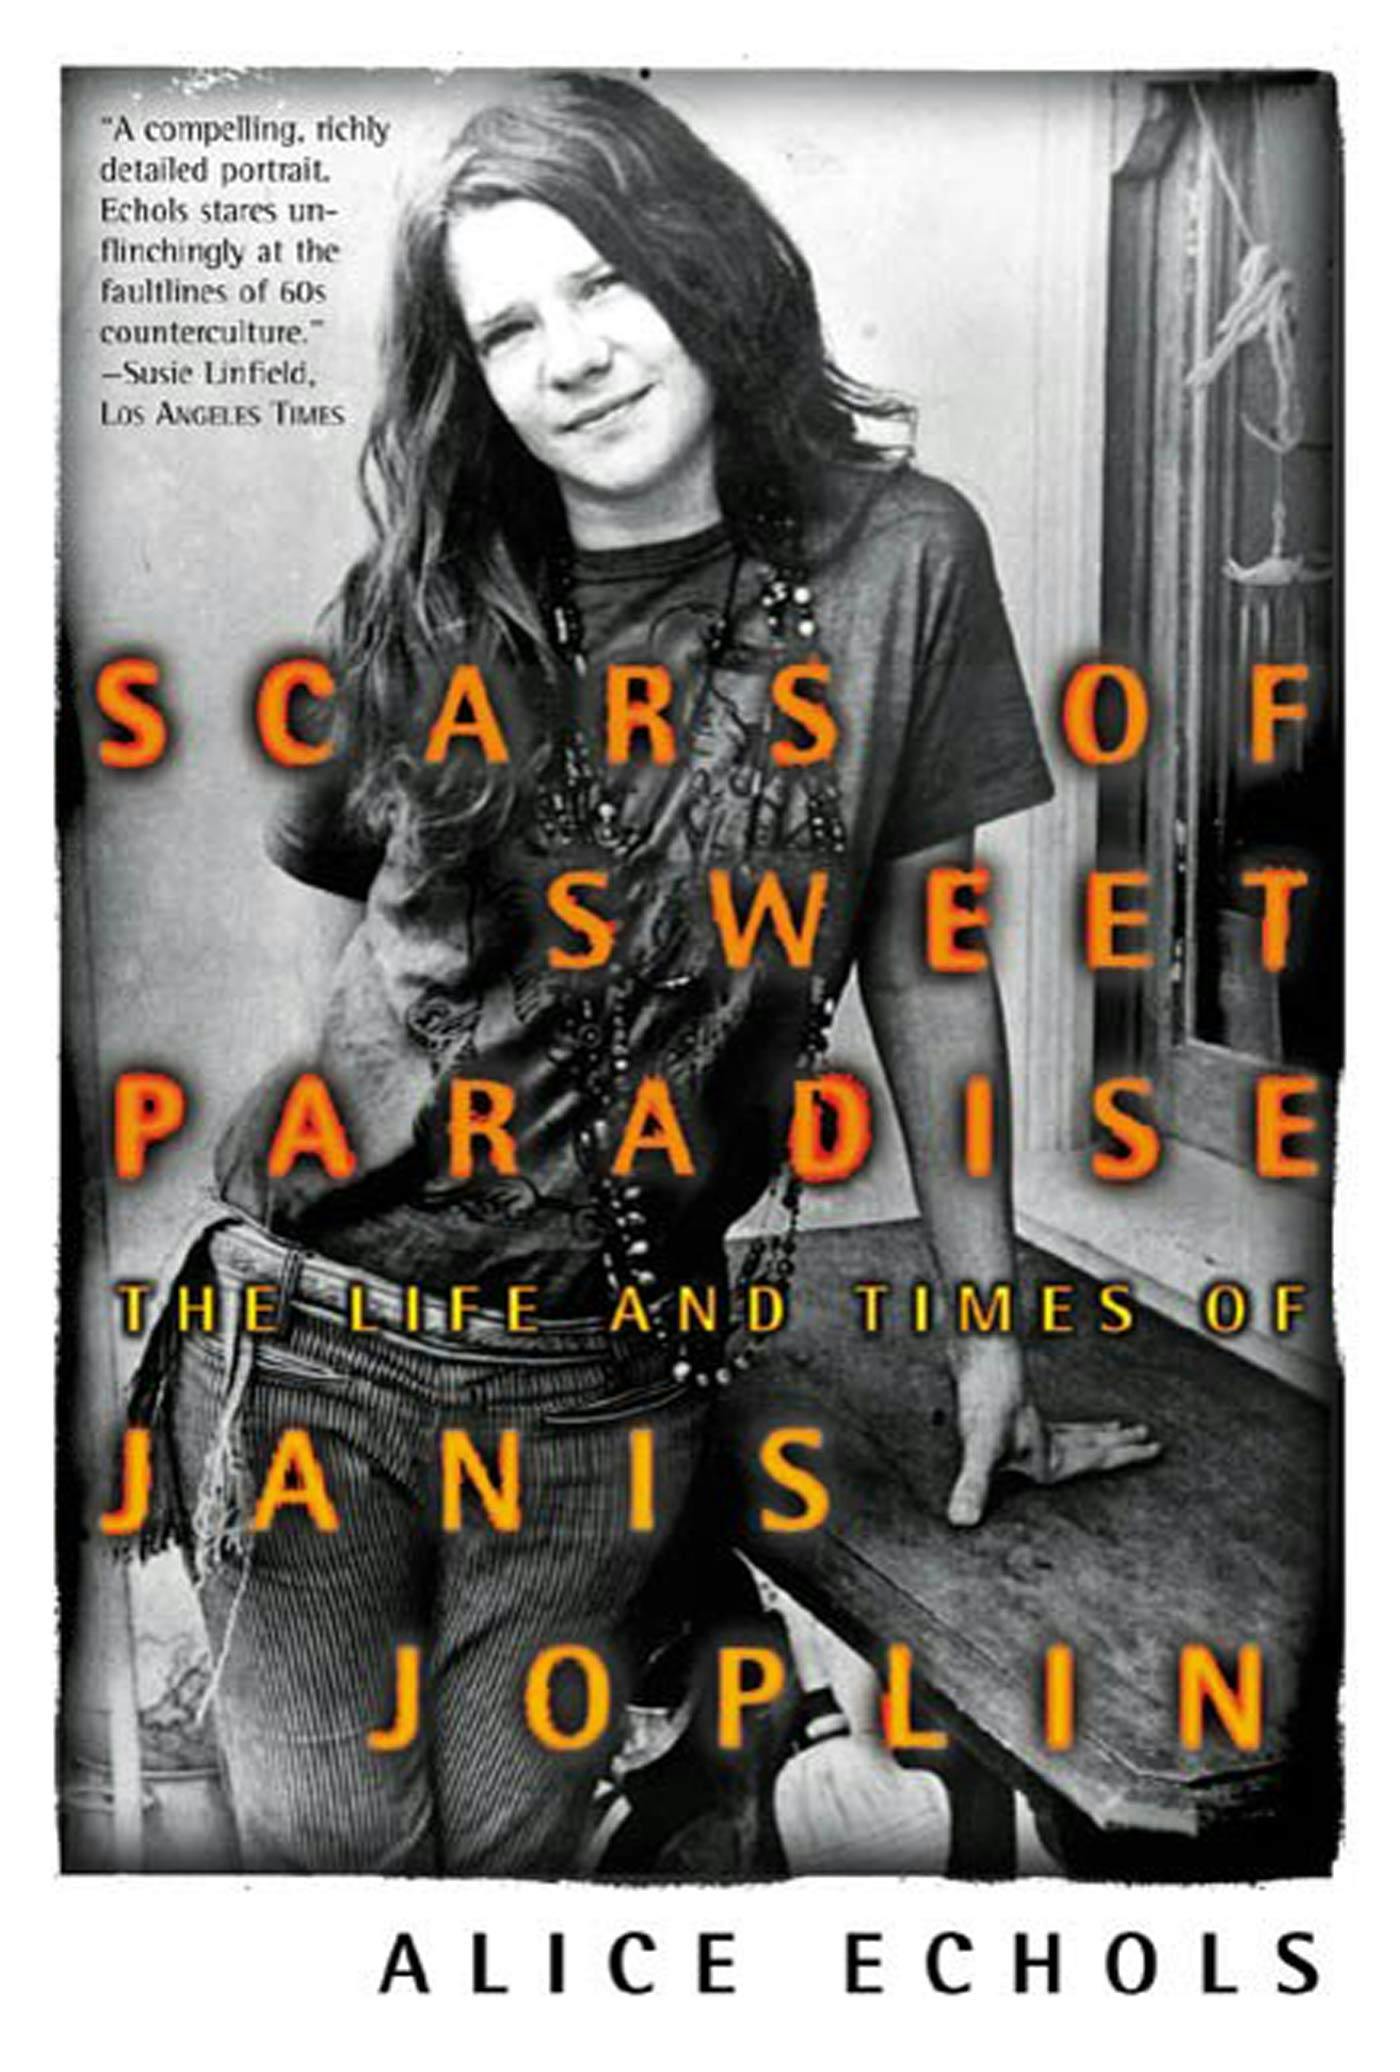 Fascinating Stories From Janis Joplin's Personal Life